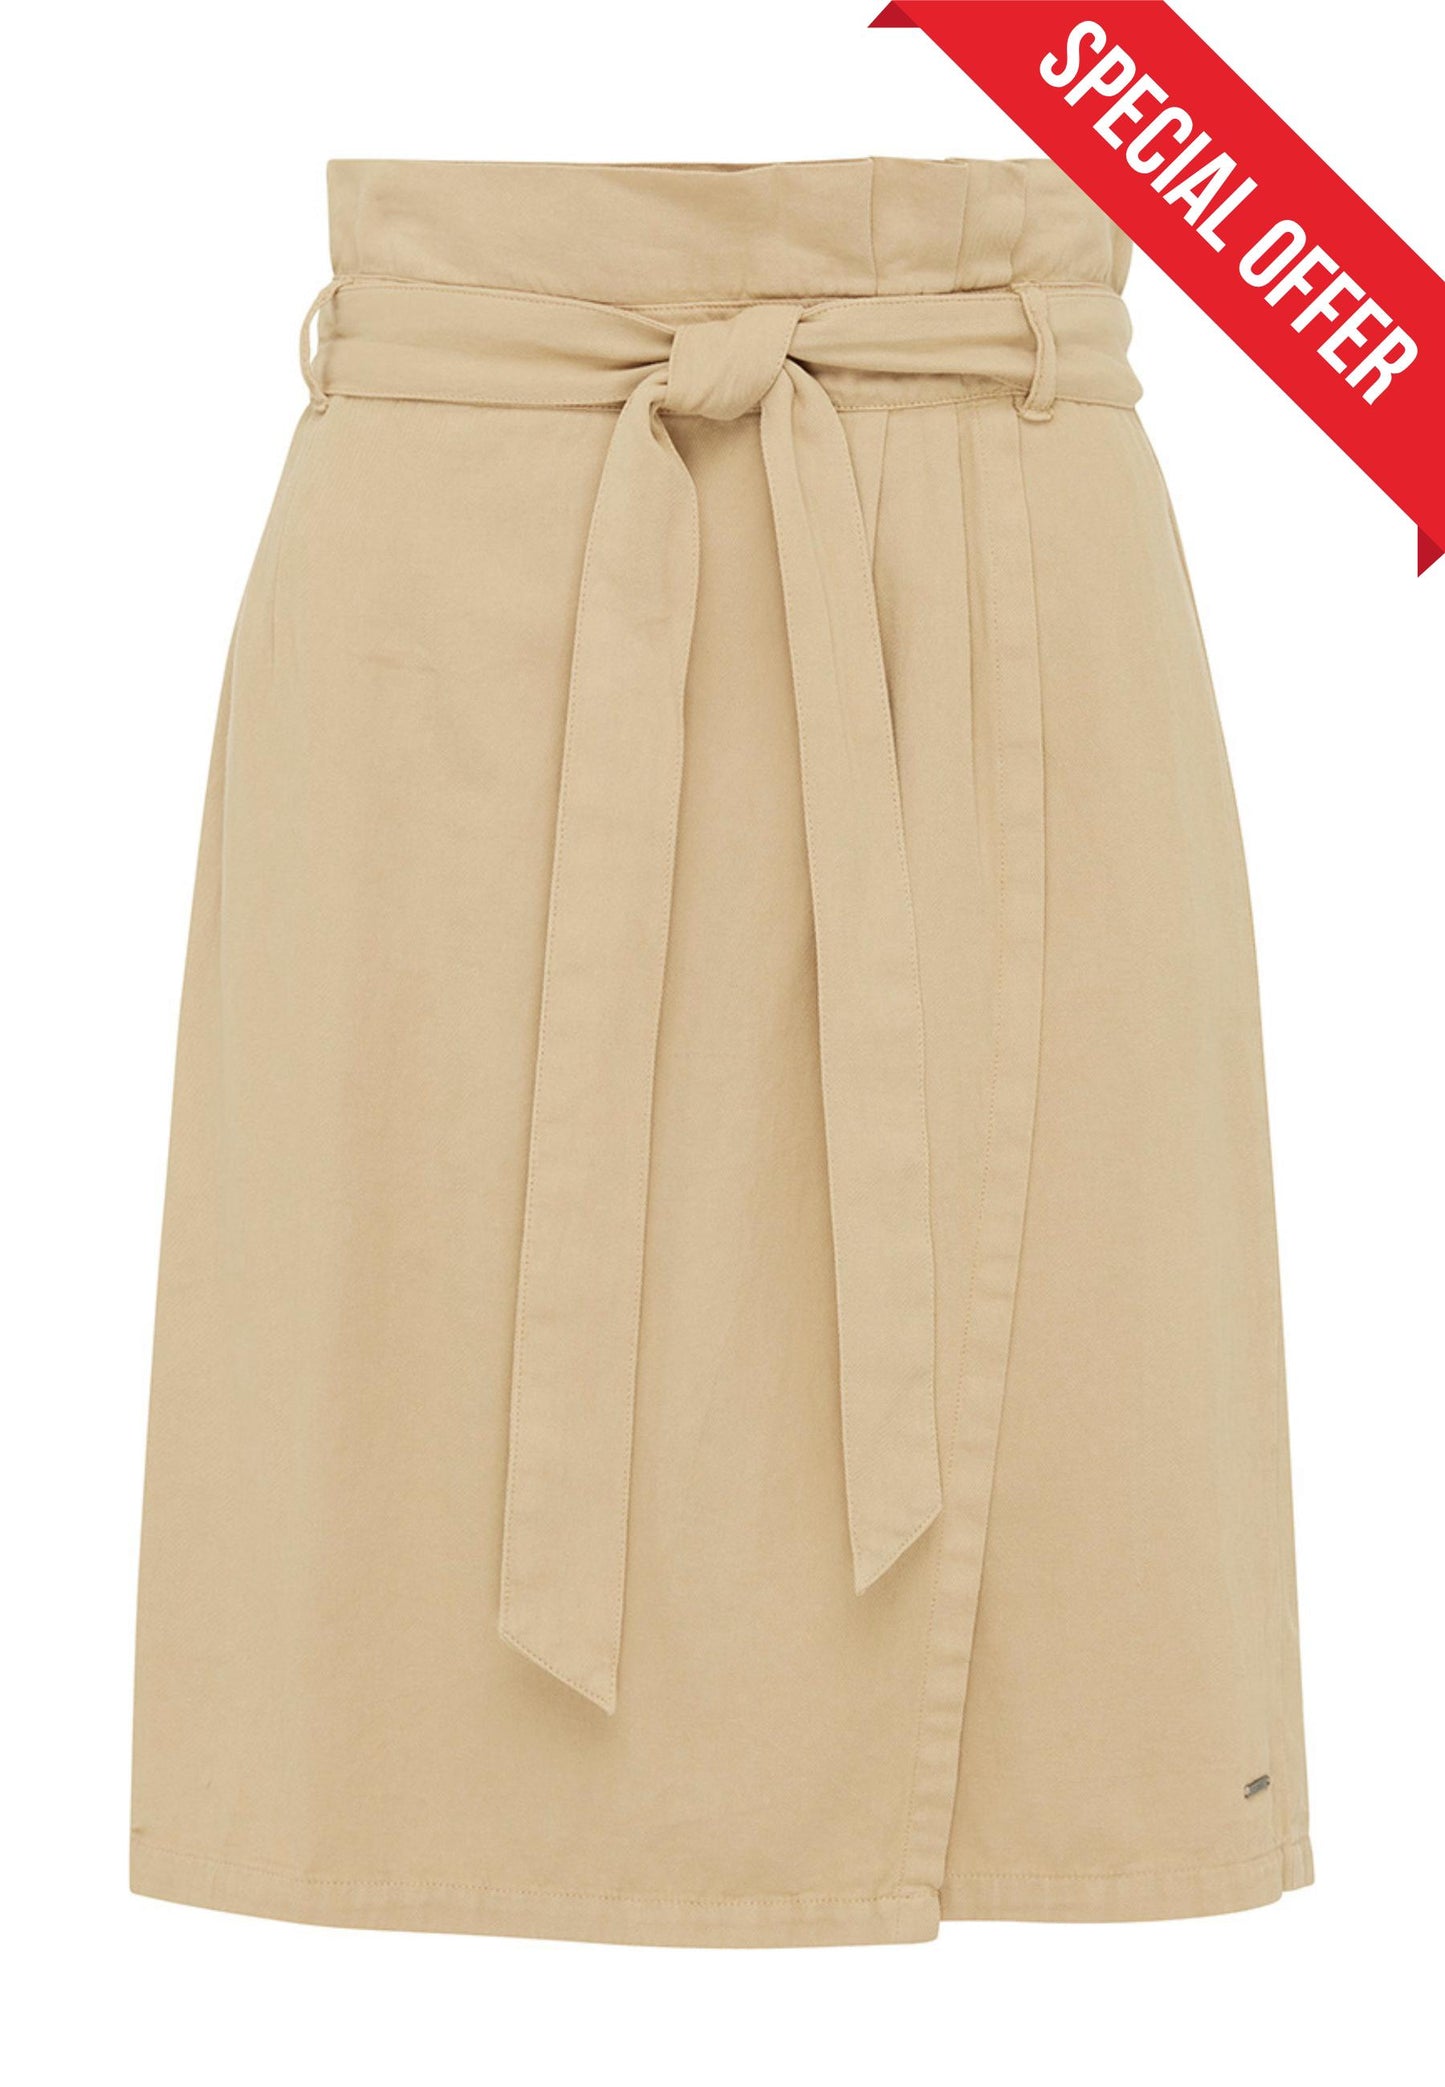 Women's High Waisted Skirt with Tie